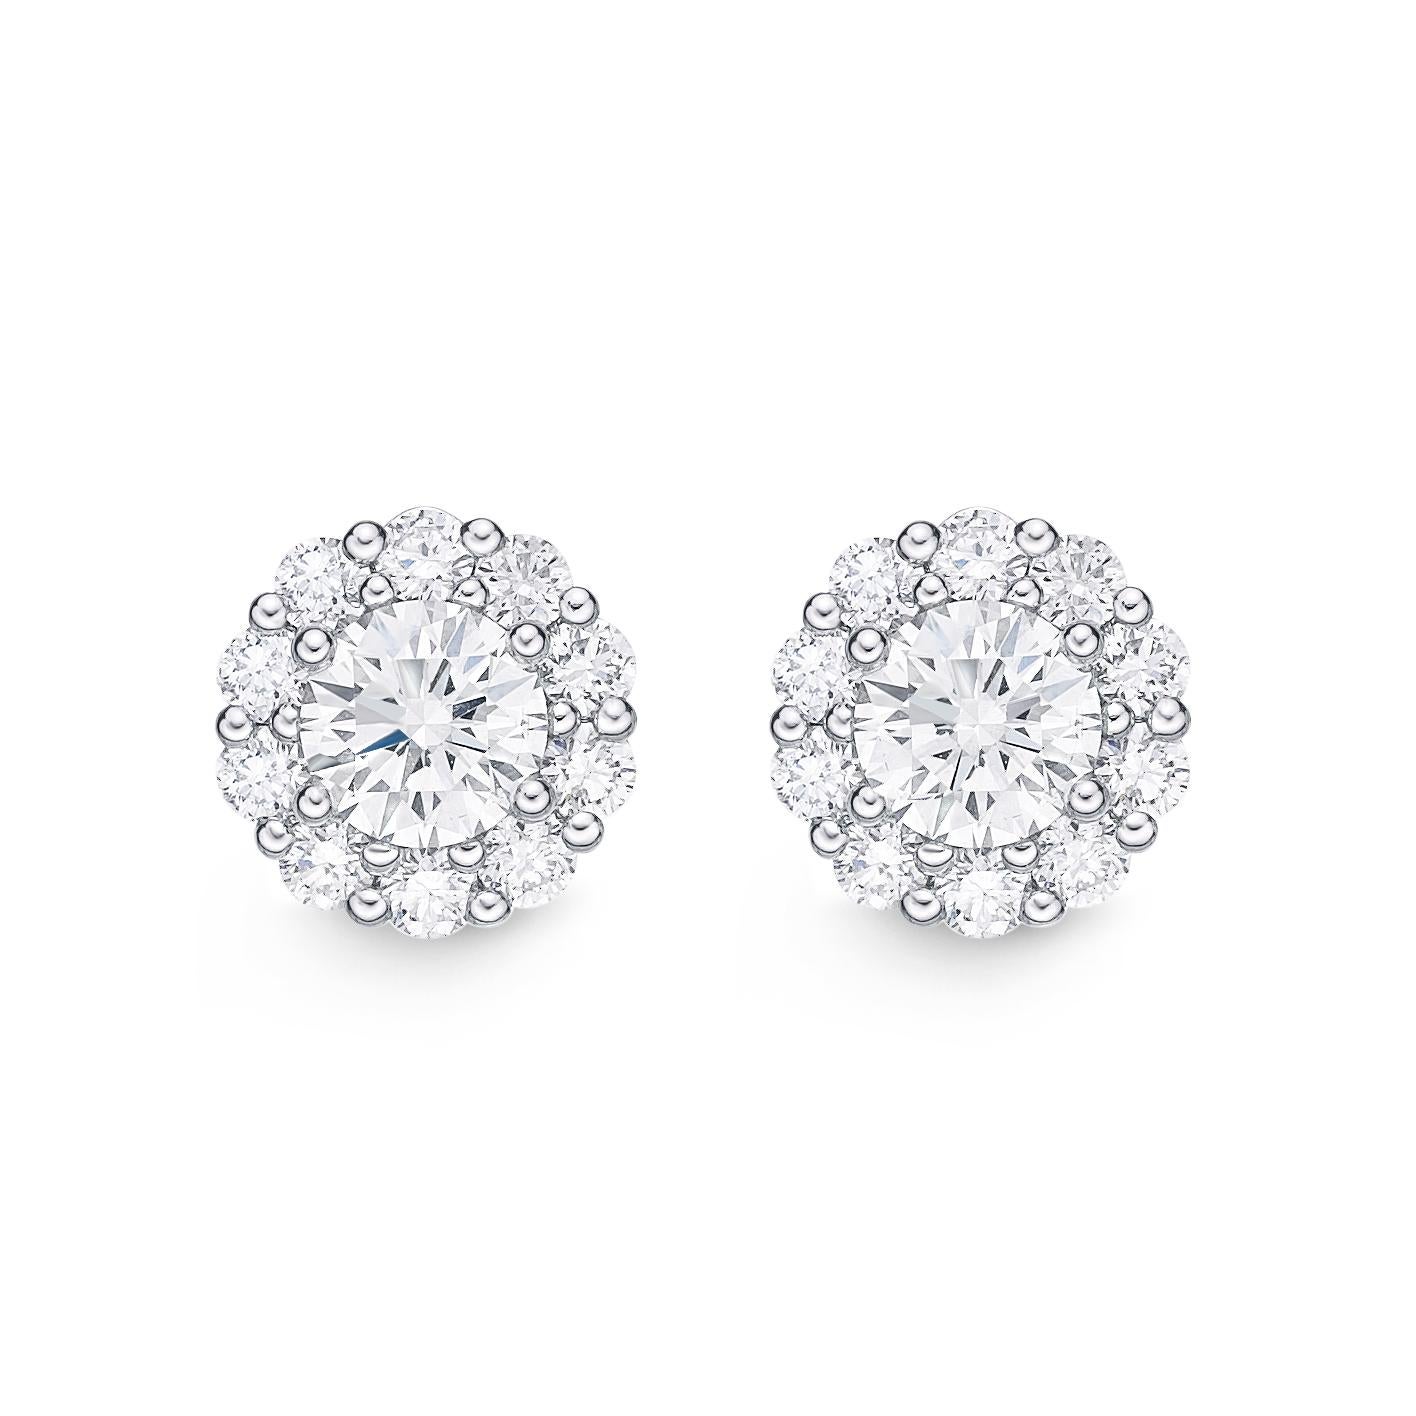 Memoire Blossom Collection Diamond Stud Earrings 0.97 ctw 18K White Gold

Additional Information:
22 Round Brilliant Cut  Diamonds equal to 0.97ctw.
Ideal Cut
G in Color SI 1 in Clarity
7.5 mm in Diameter